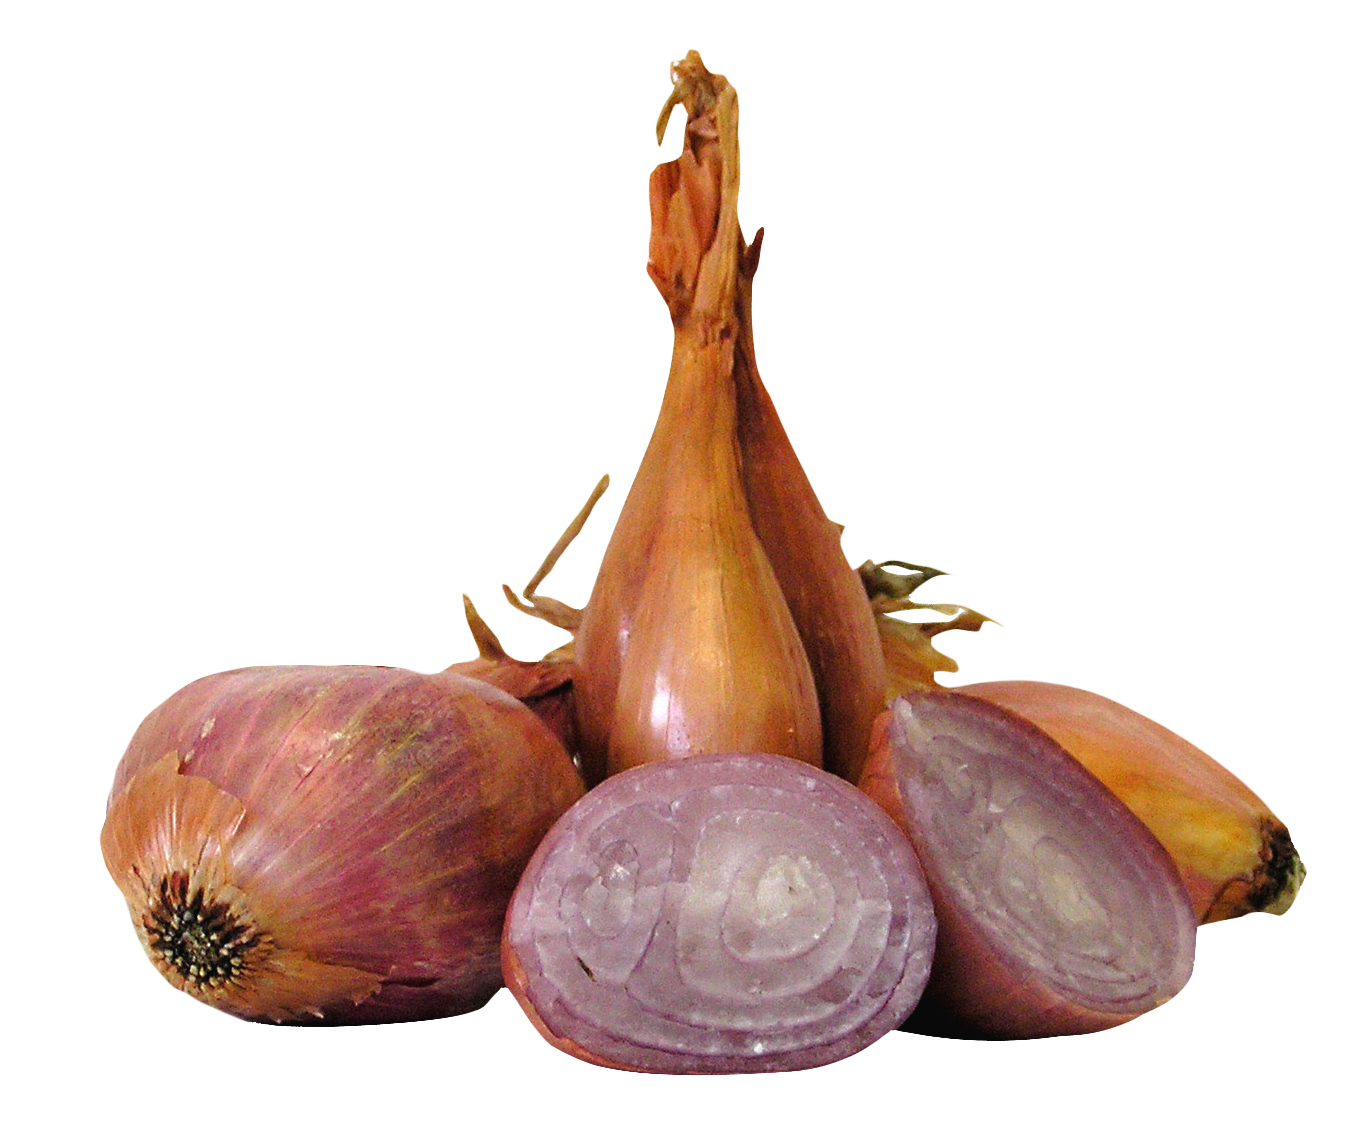 Onion clipart shallot. Onions png image purepng